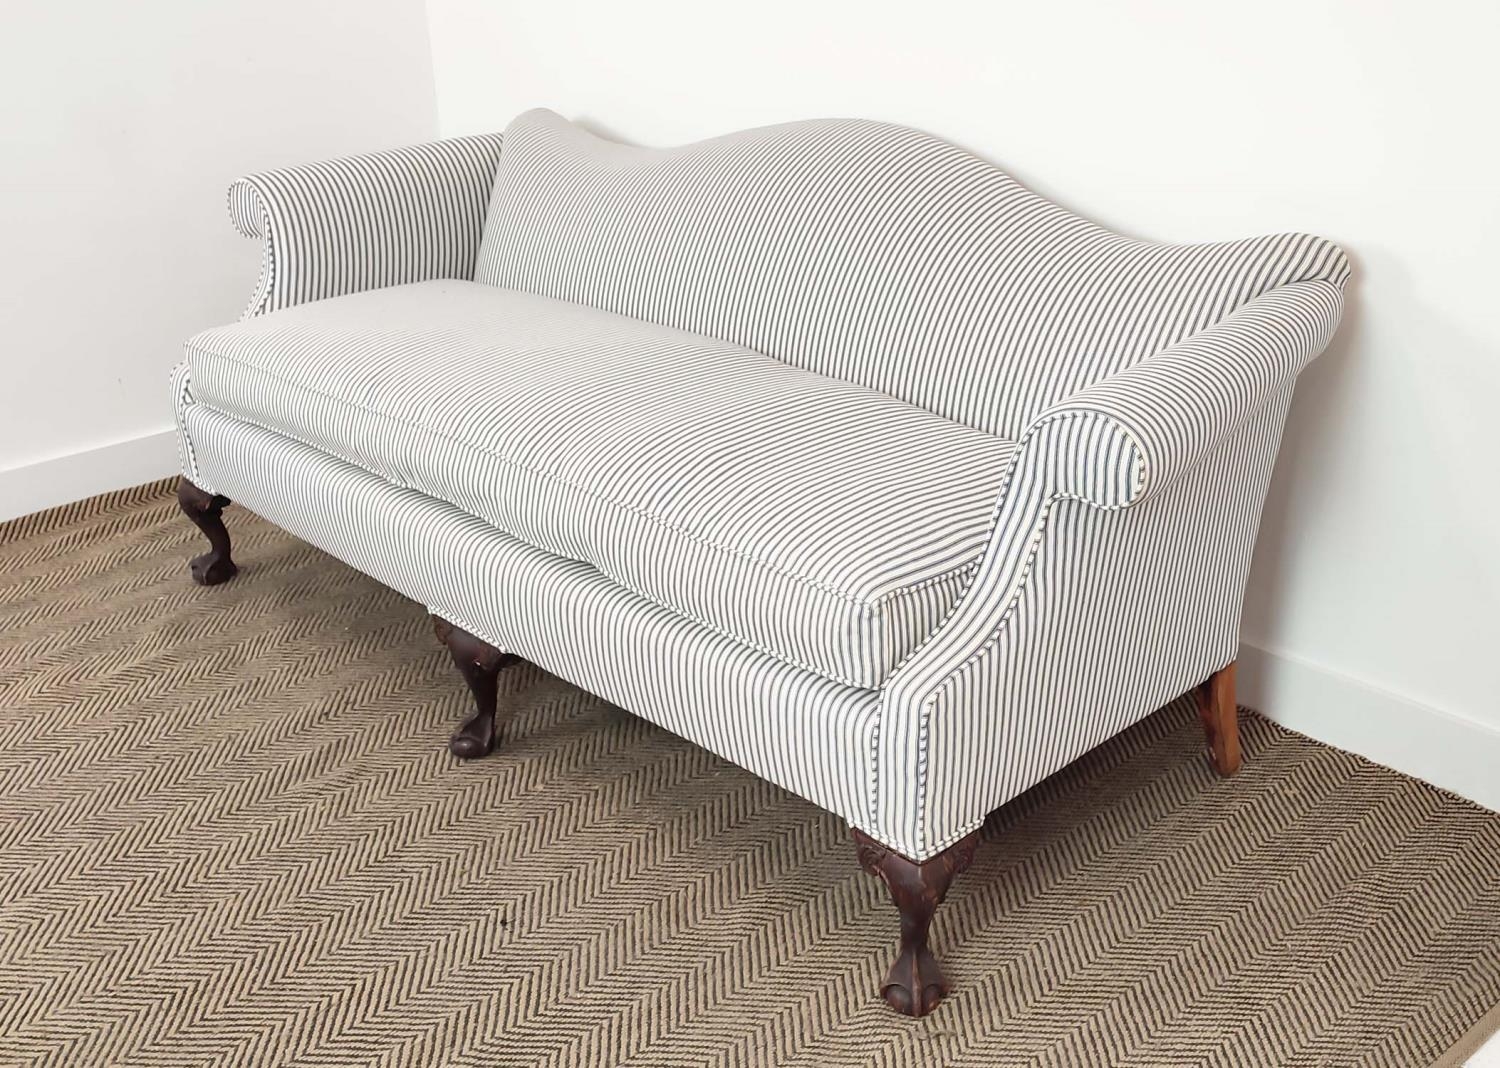 SOFA, George III style in new ticking upholstery, 85cm H x 204cm. - Image 4 of 14